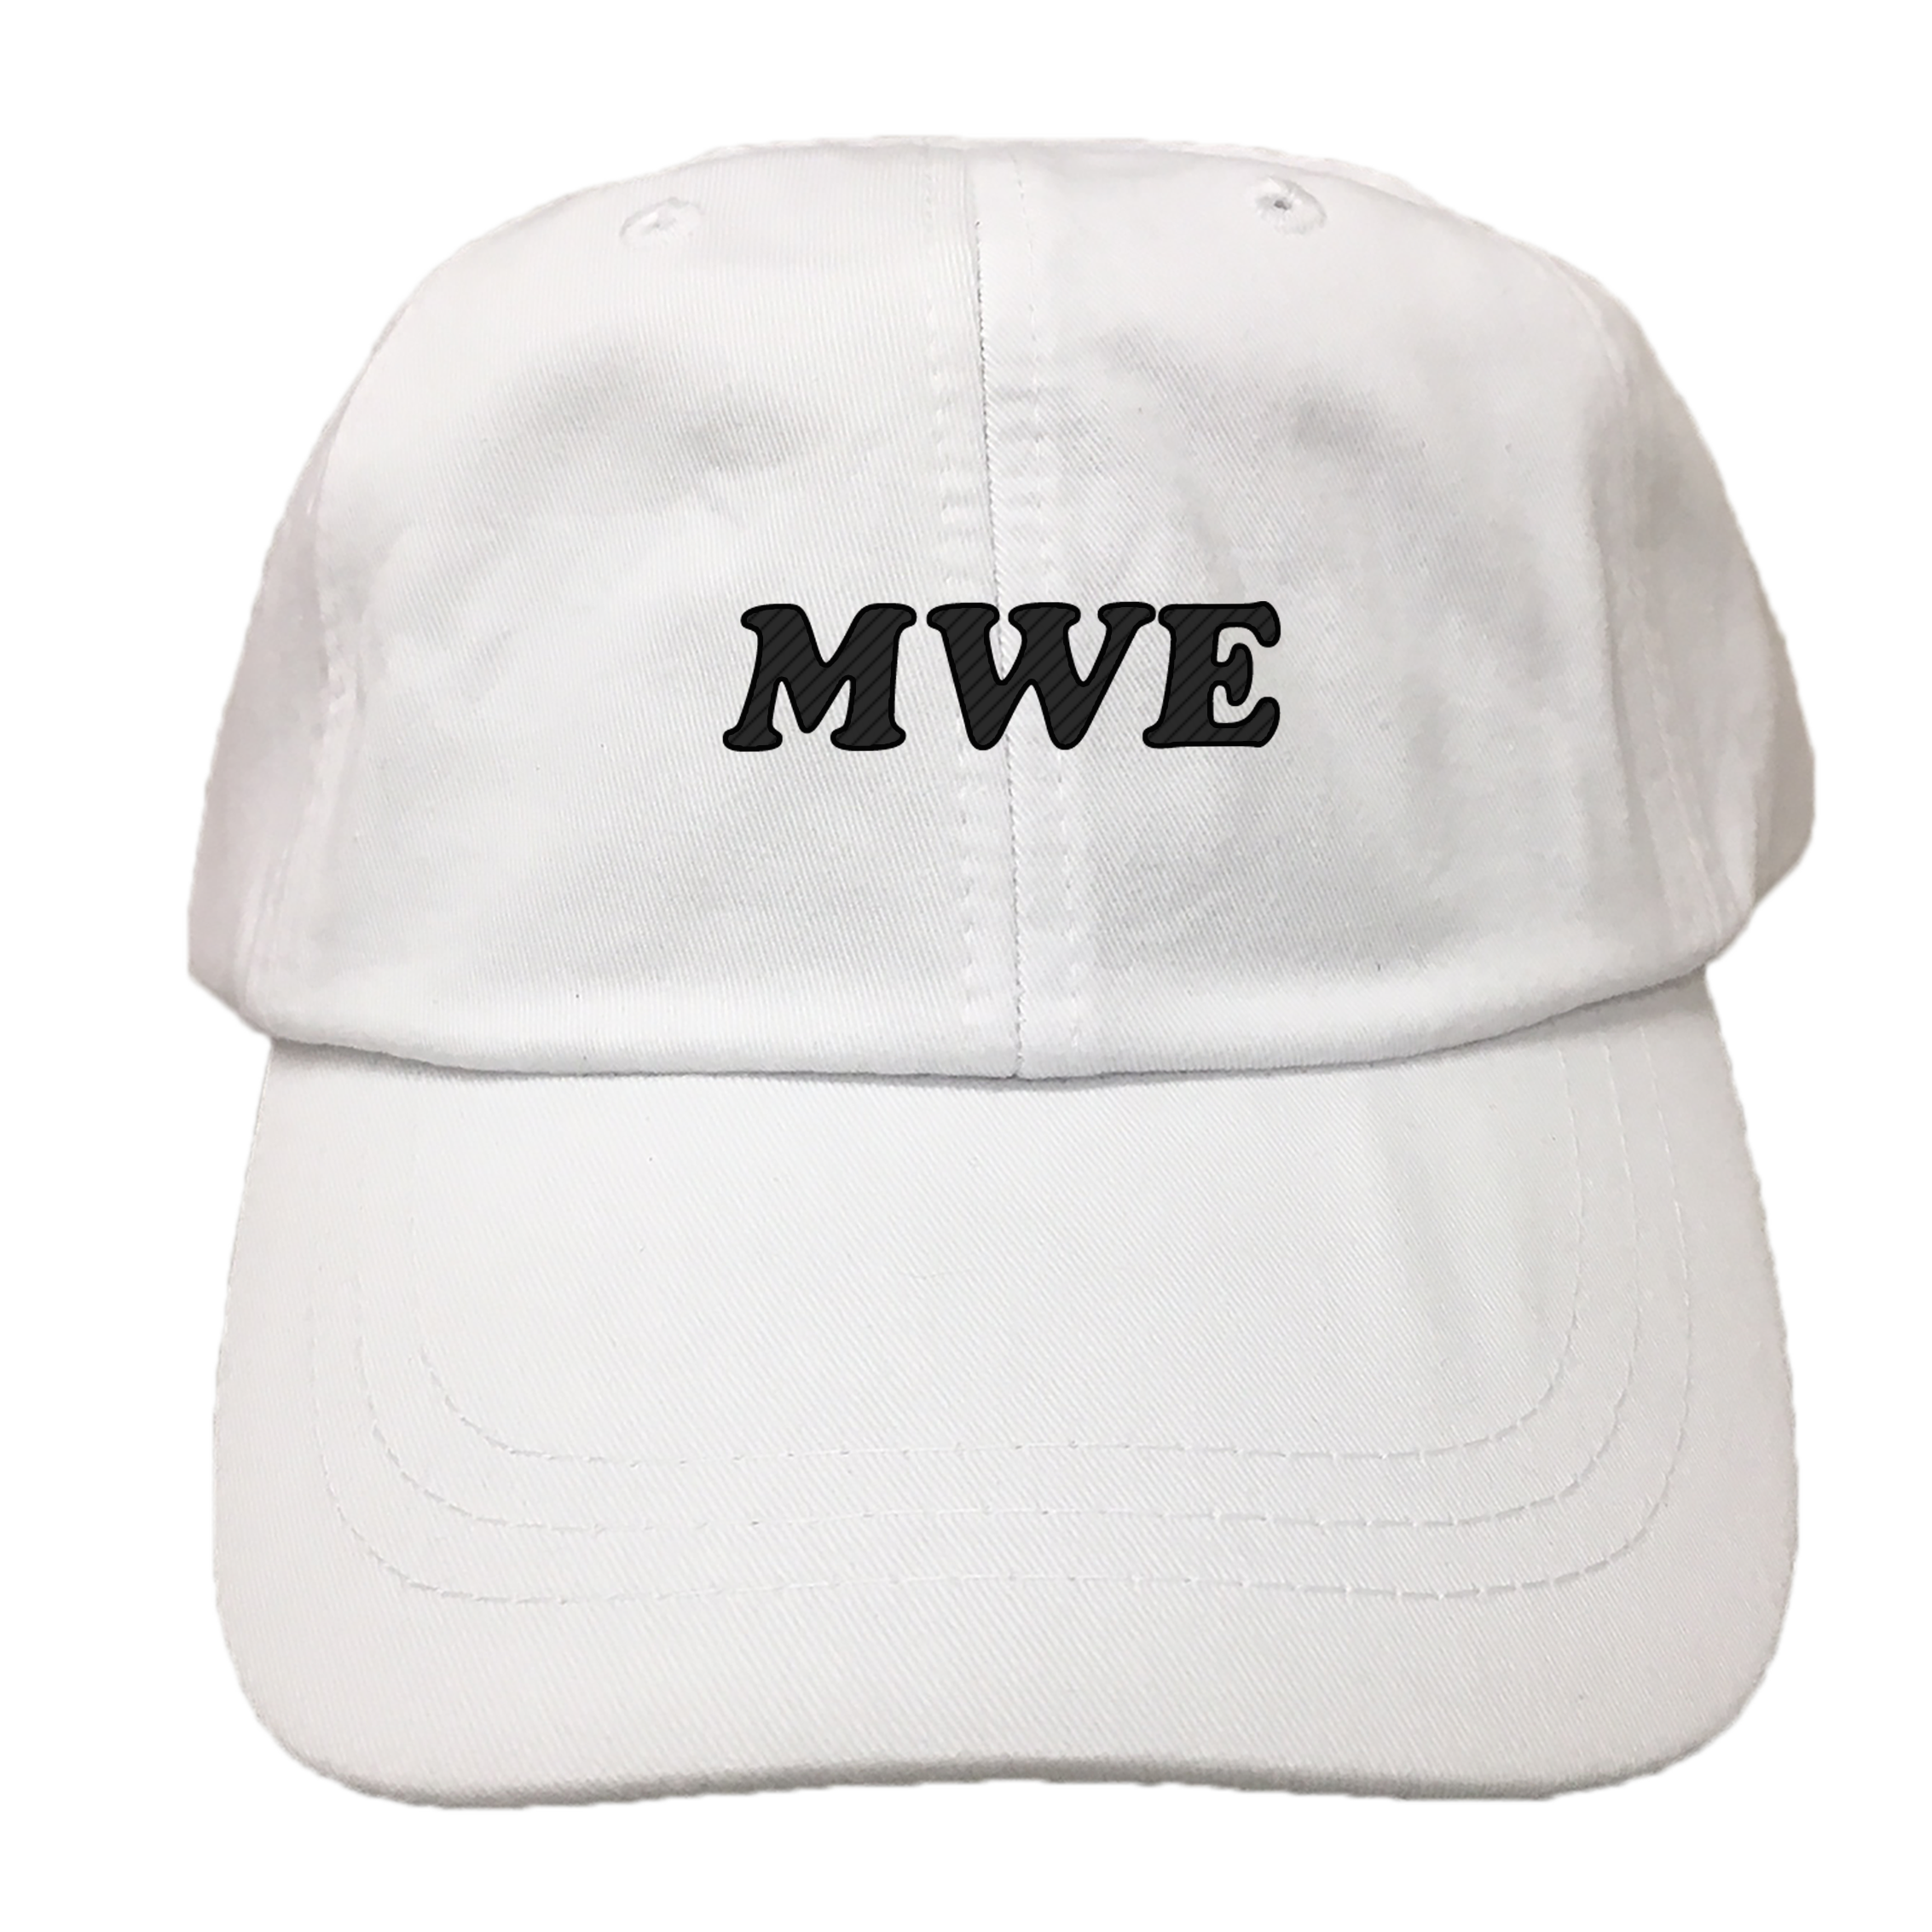 MWE EMBROIDERED Cotton Twill HAT